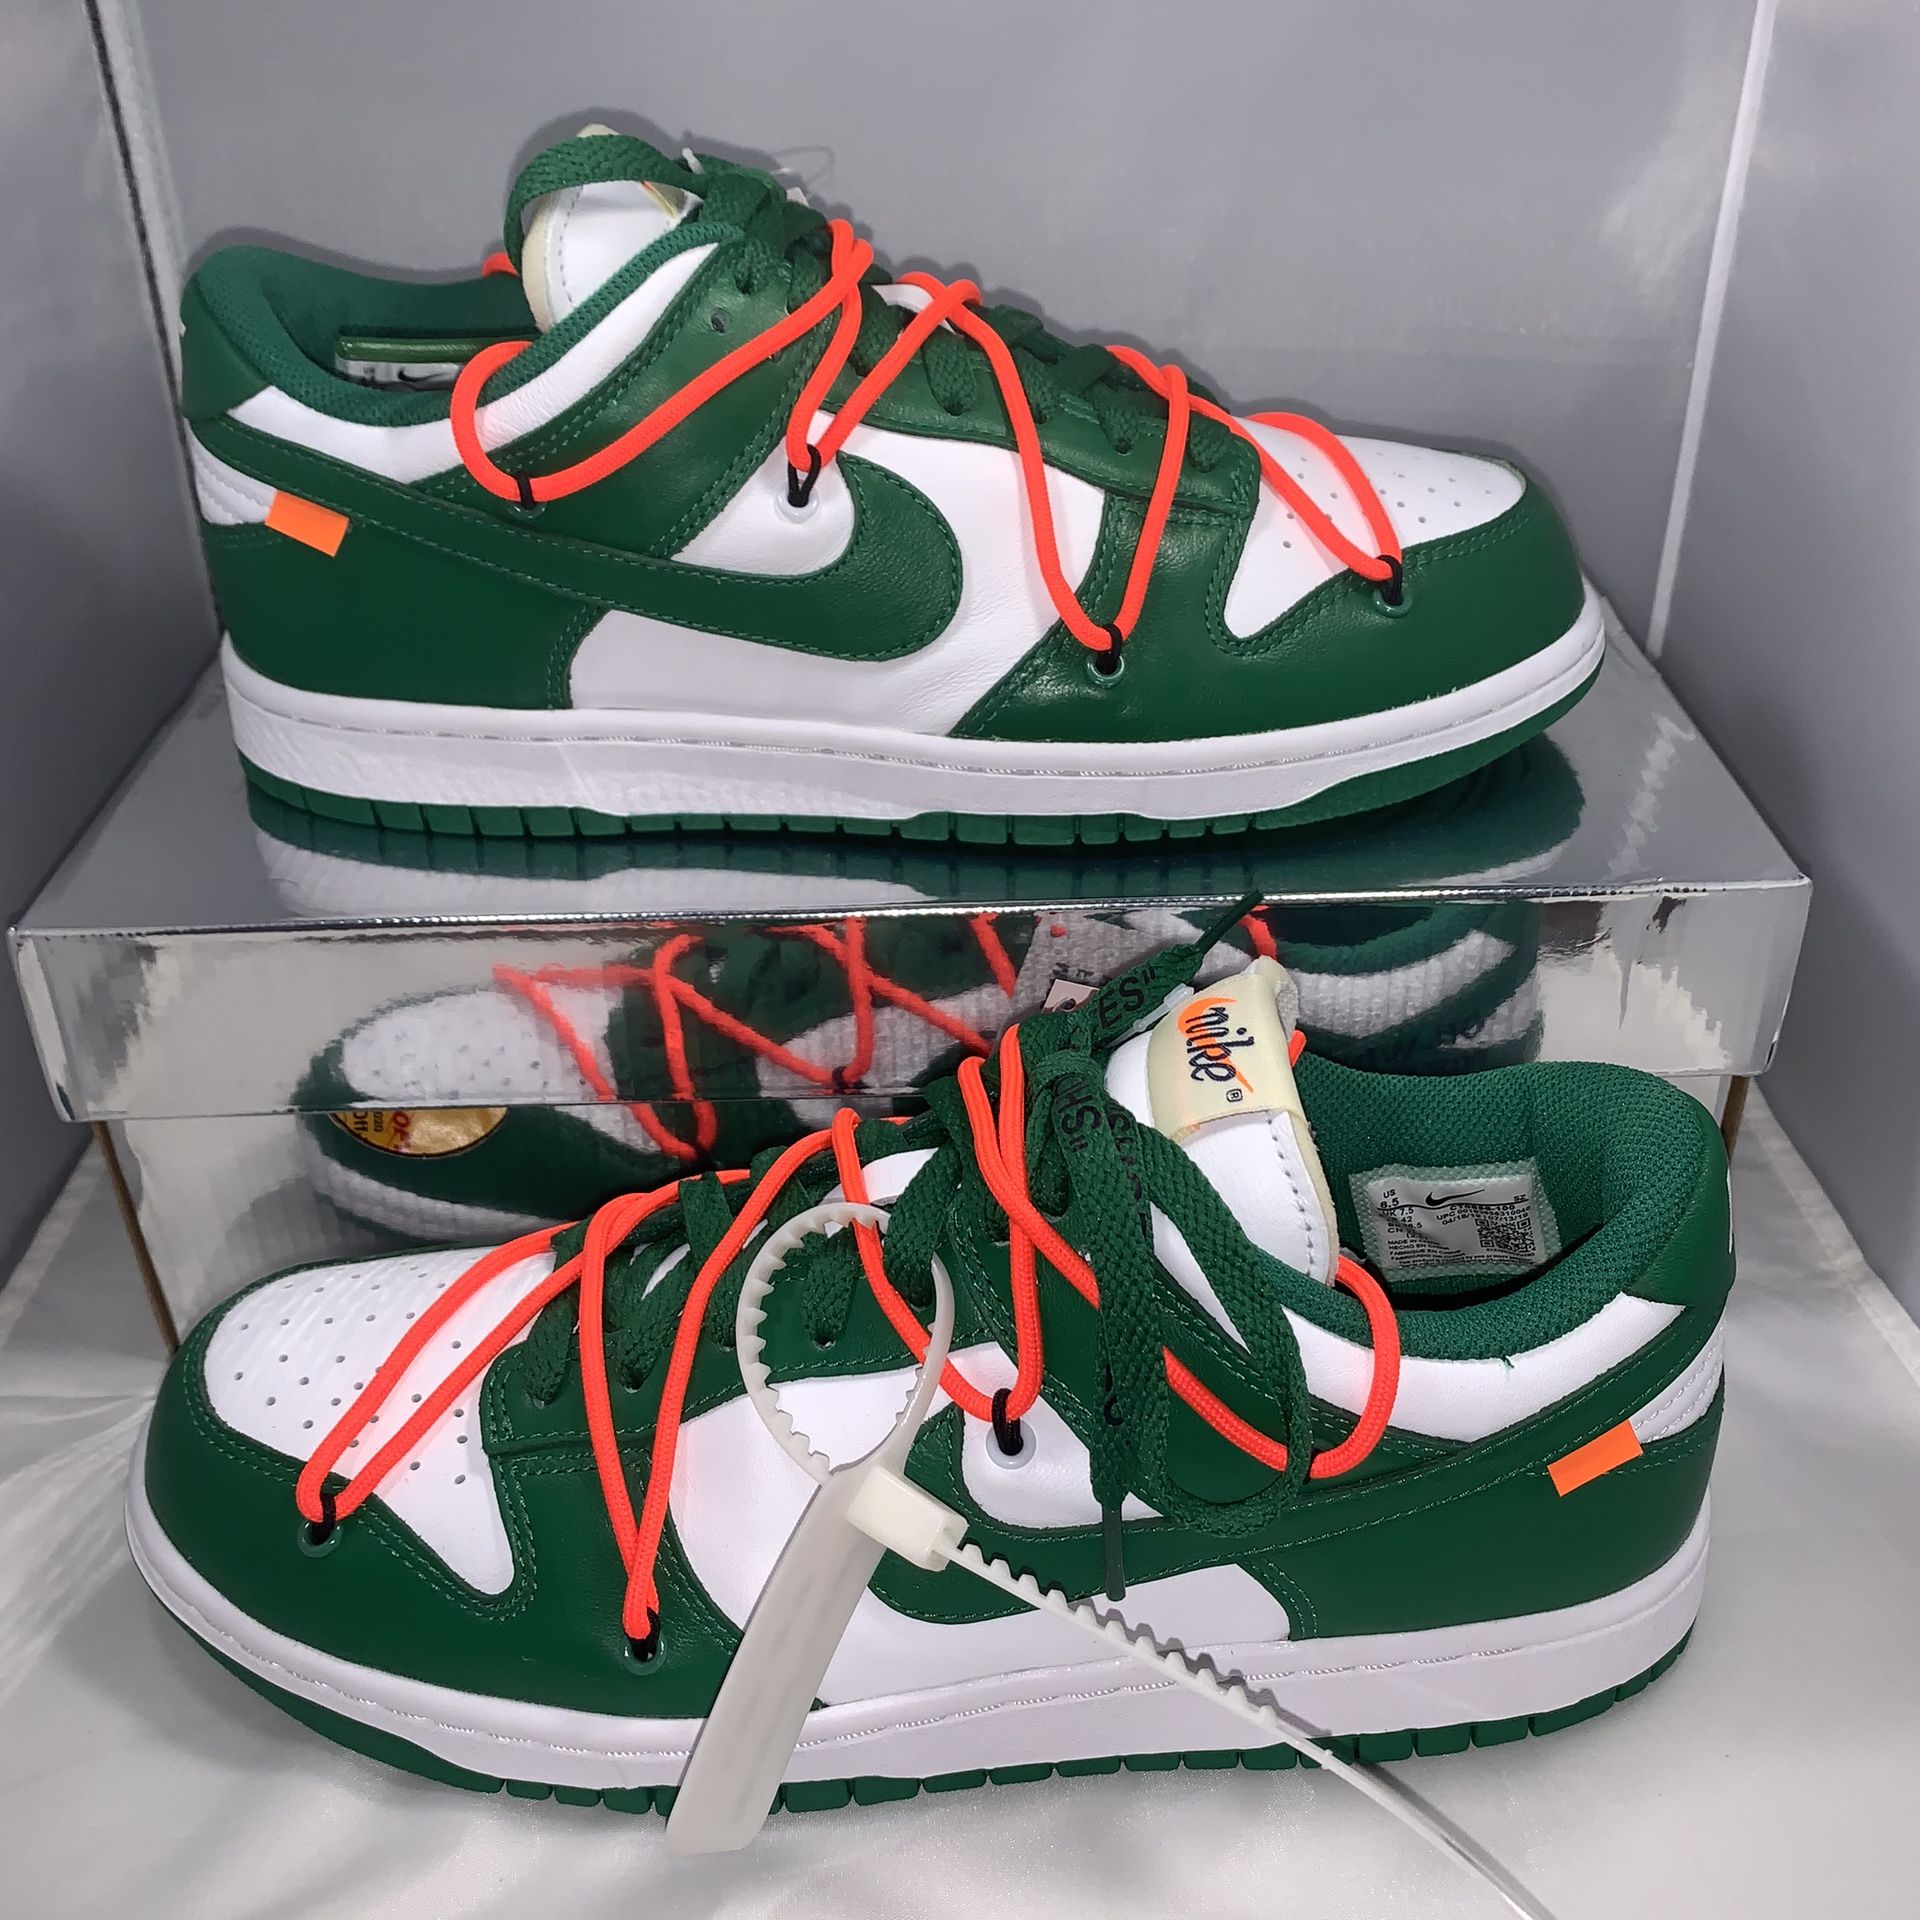 Off-White x Nike Dunk Low ‘Pine Green’ Size 8.5